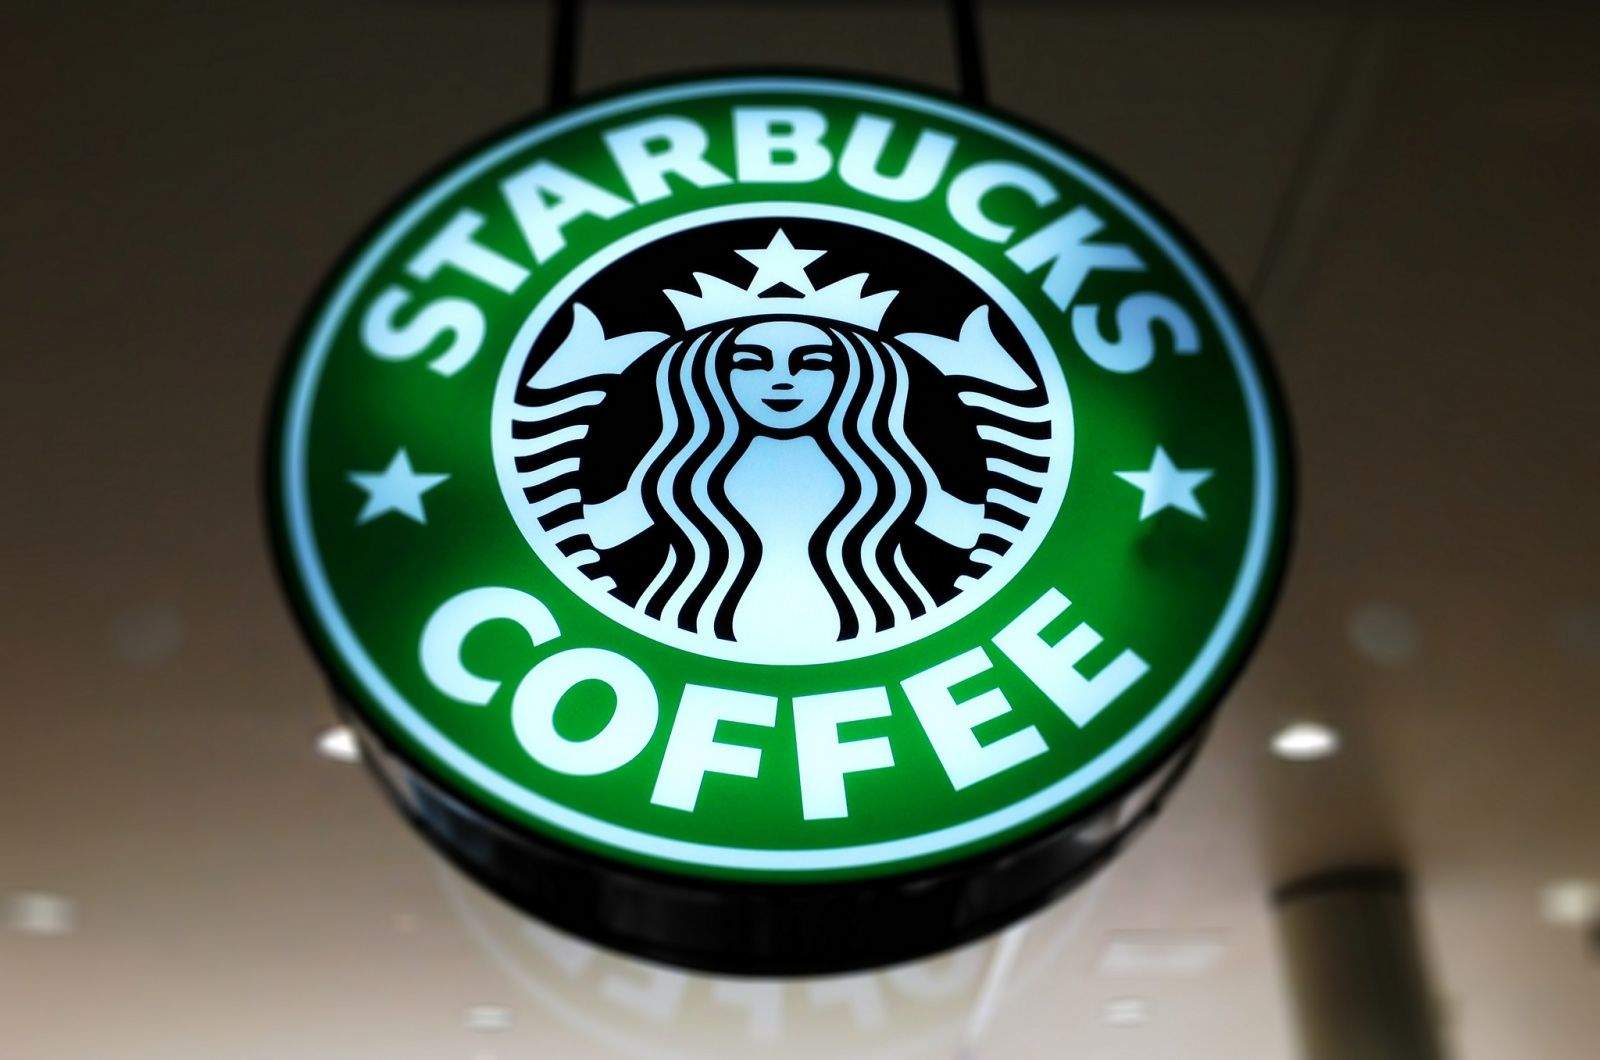 Apple Pay finally overtakes Starbucks in mobile payments